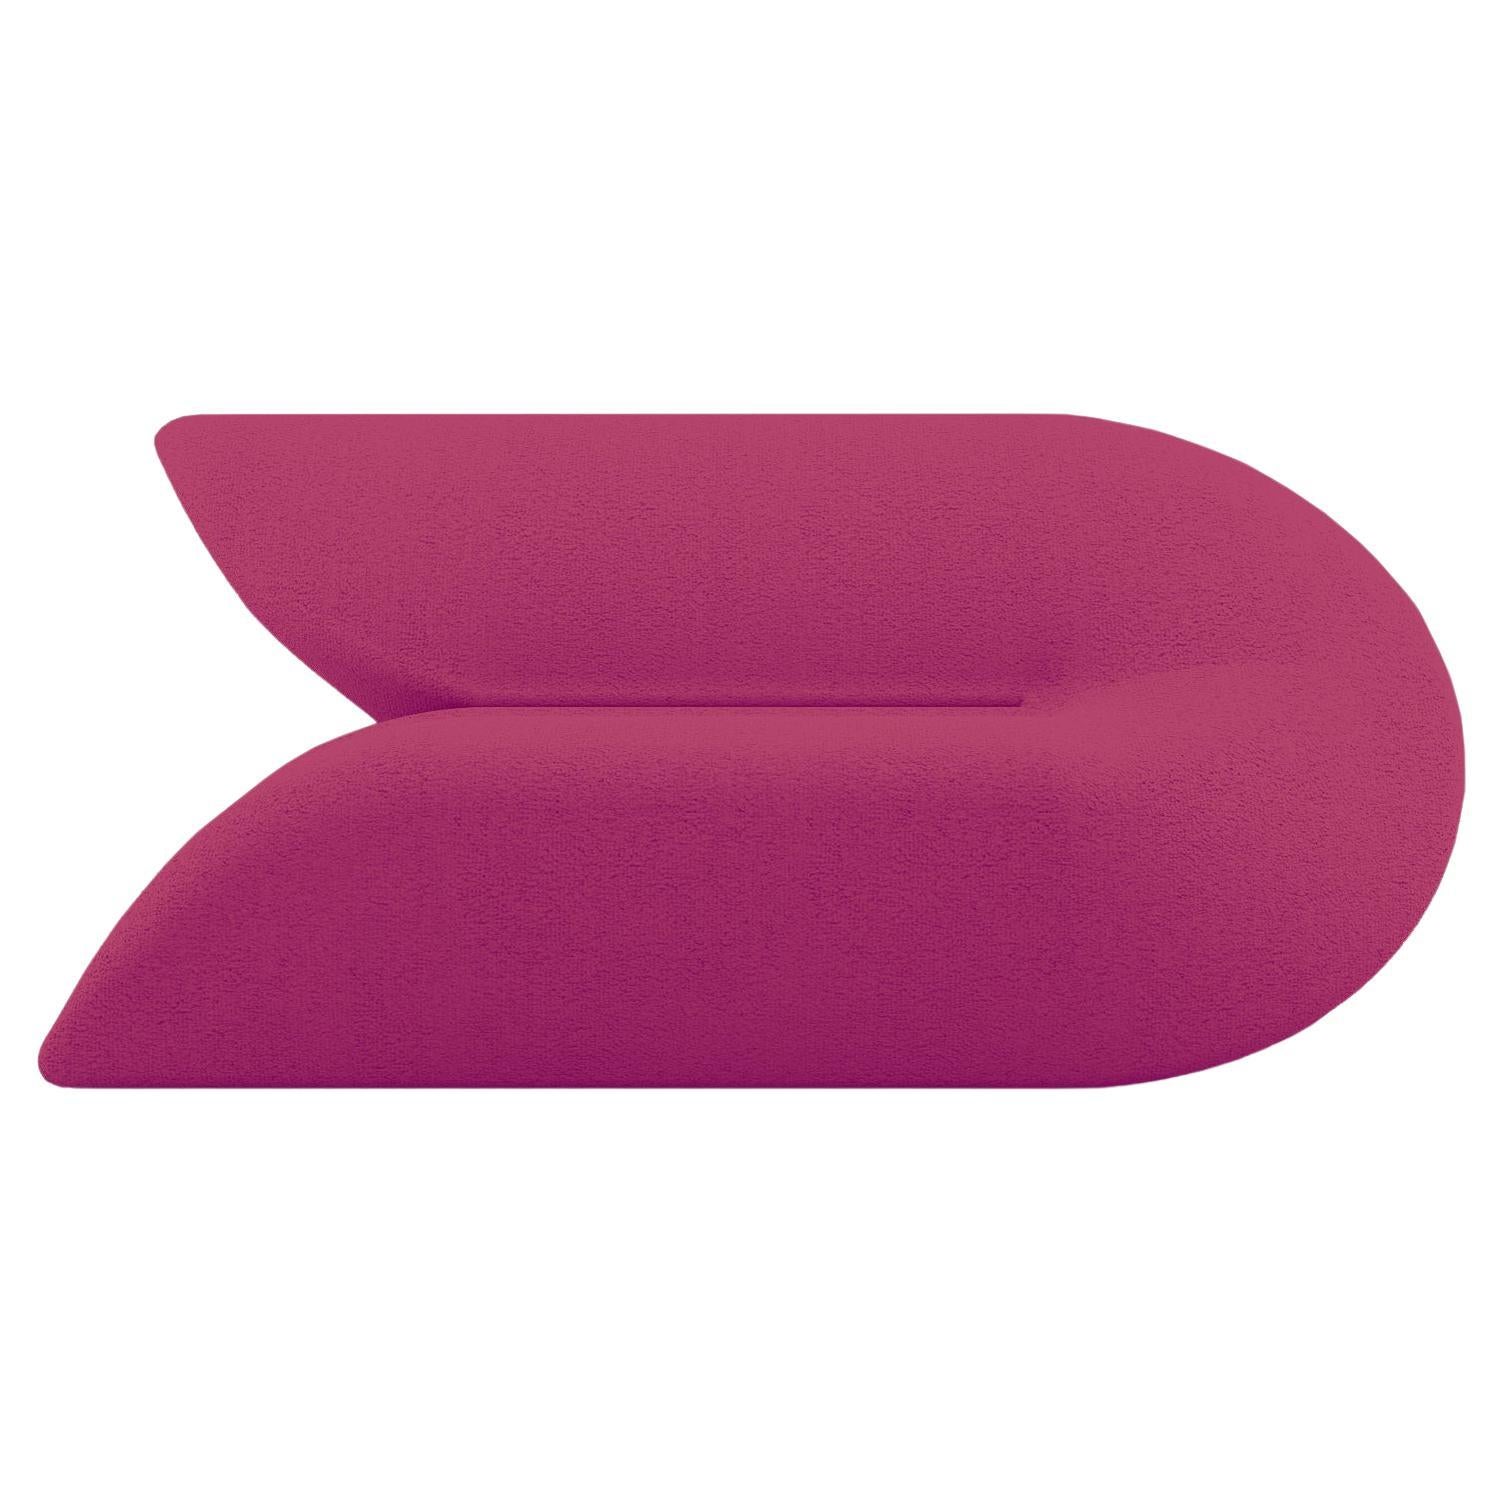 Delta Sofa - Modern Purple Upholstered Two Seat Sofa For Sale